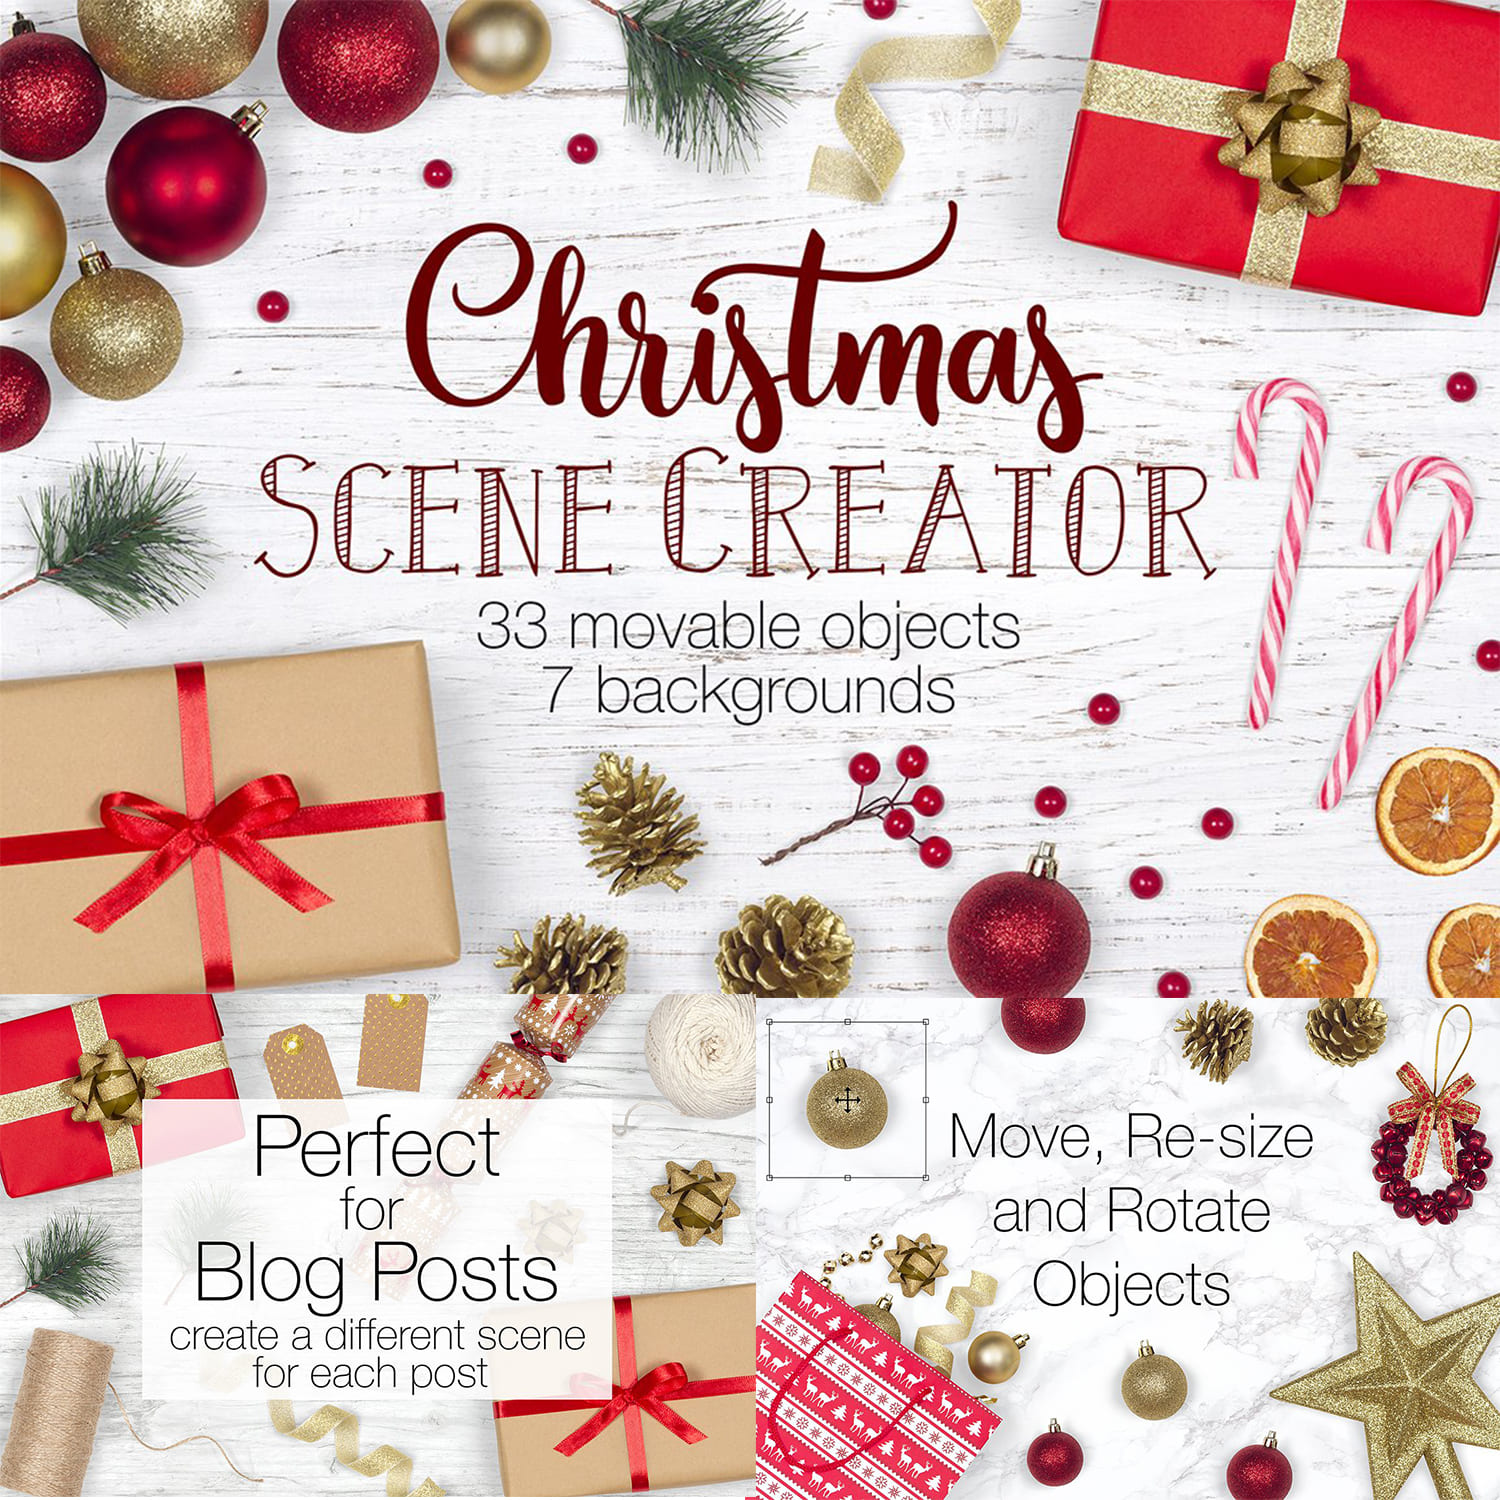 Christmas Scene Creator - Top View cover.